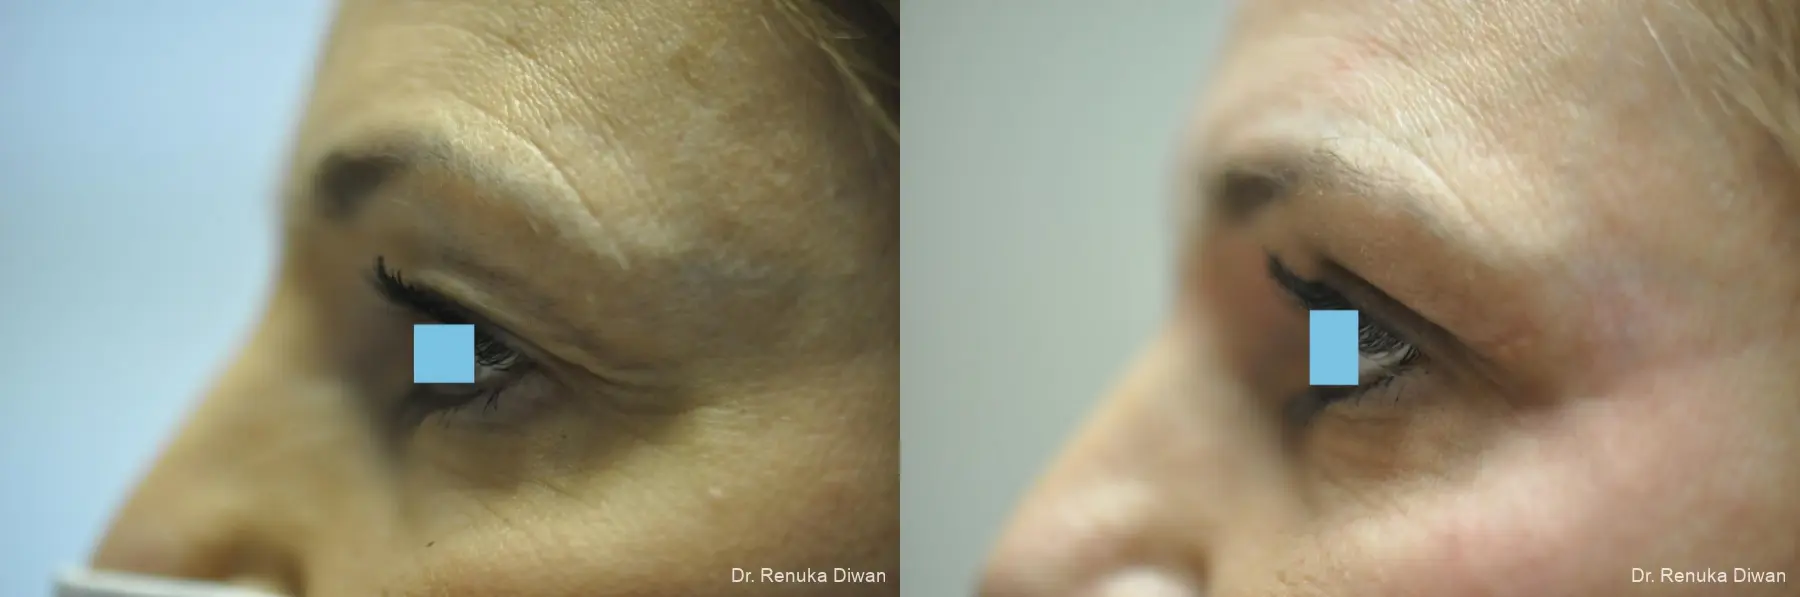 Blepharoplasty: Patient 7 - Before and After 3